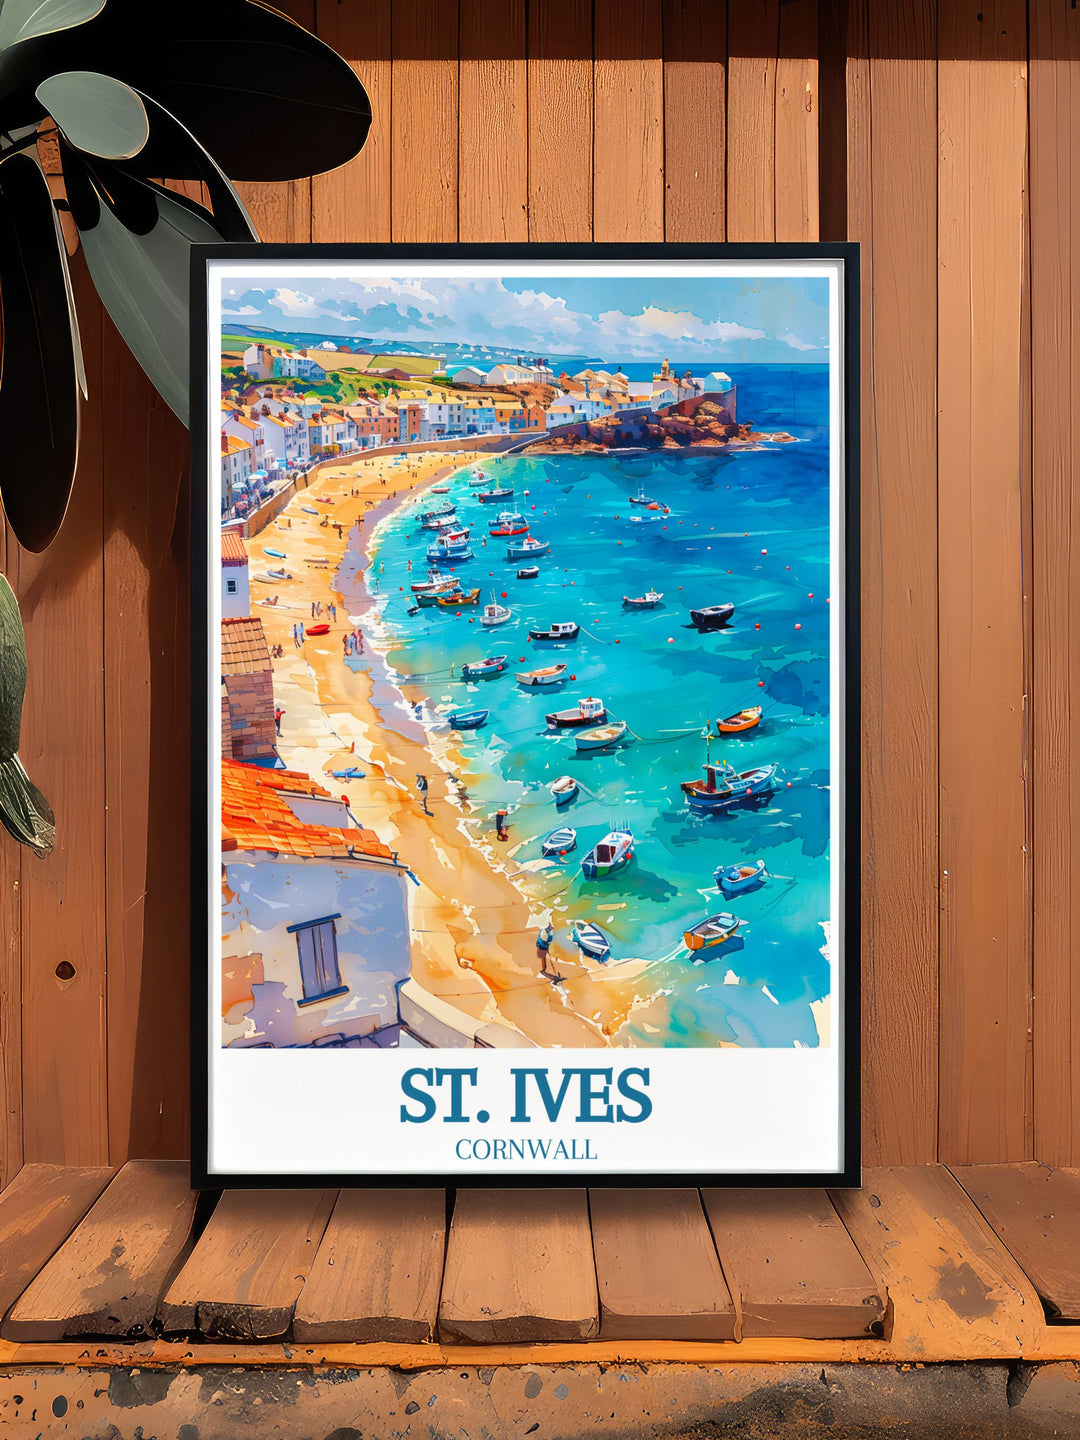 Experience the blend of history and coastal beauty in St. Ives through this detailed poster, highlighting the serene landscapes and cultural vibrancy of the town.